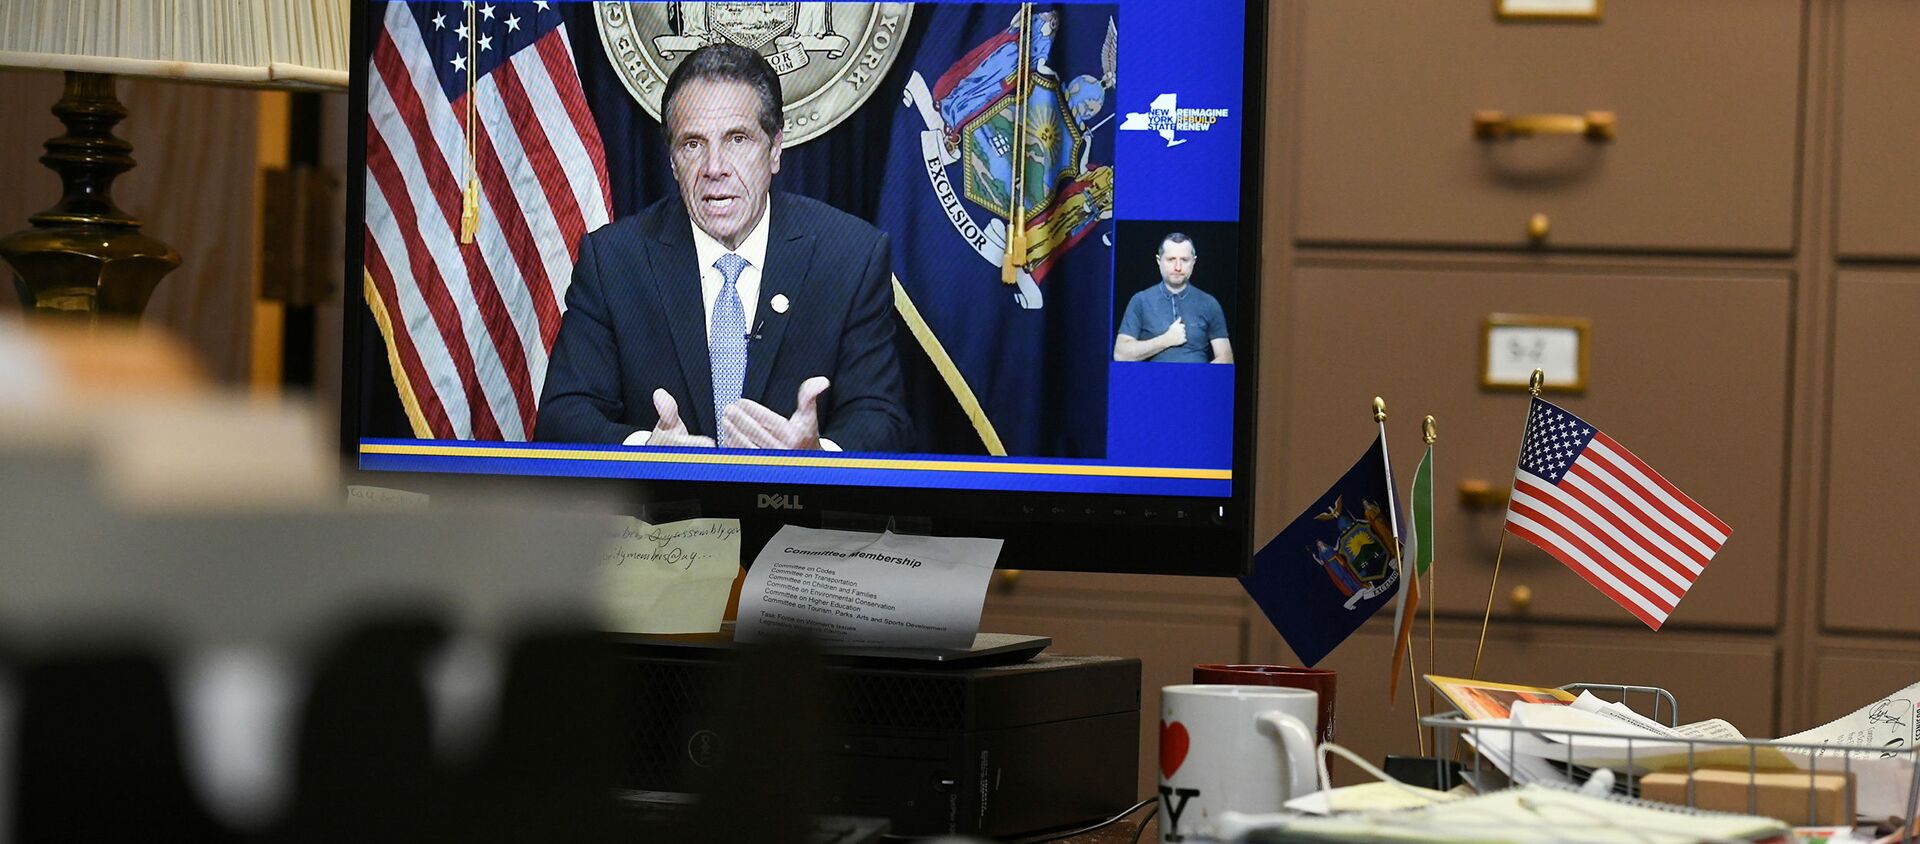 Governor Andrew Cuomo's resignation is seen on a computer screen in Assemblywoman Patricia Fahy's office at the Legislative Office Building in Albany, New York, U.S., August 10, 2021 - Sputnik International, 1920, 10.08.2021